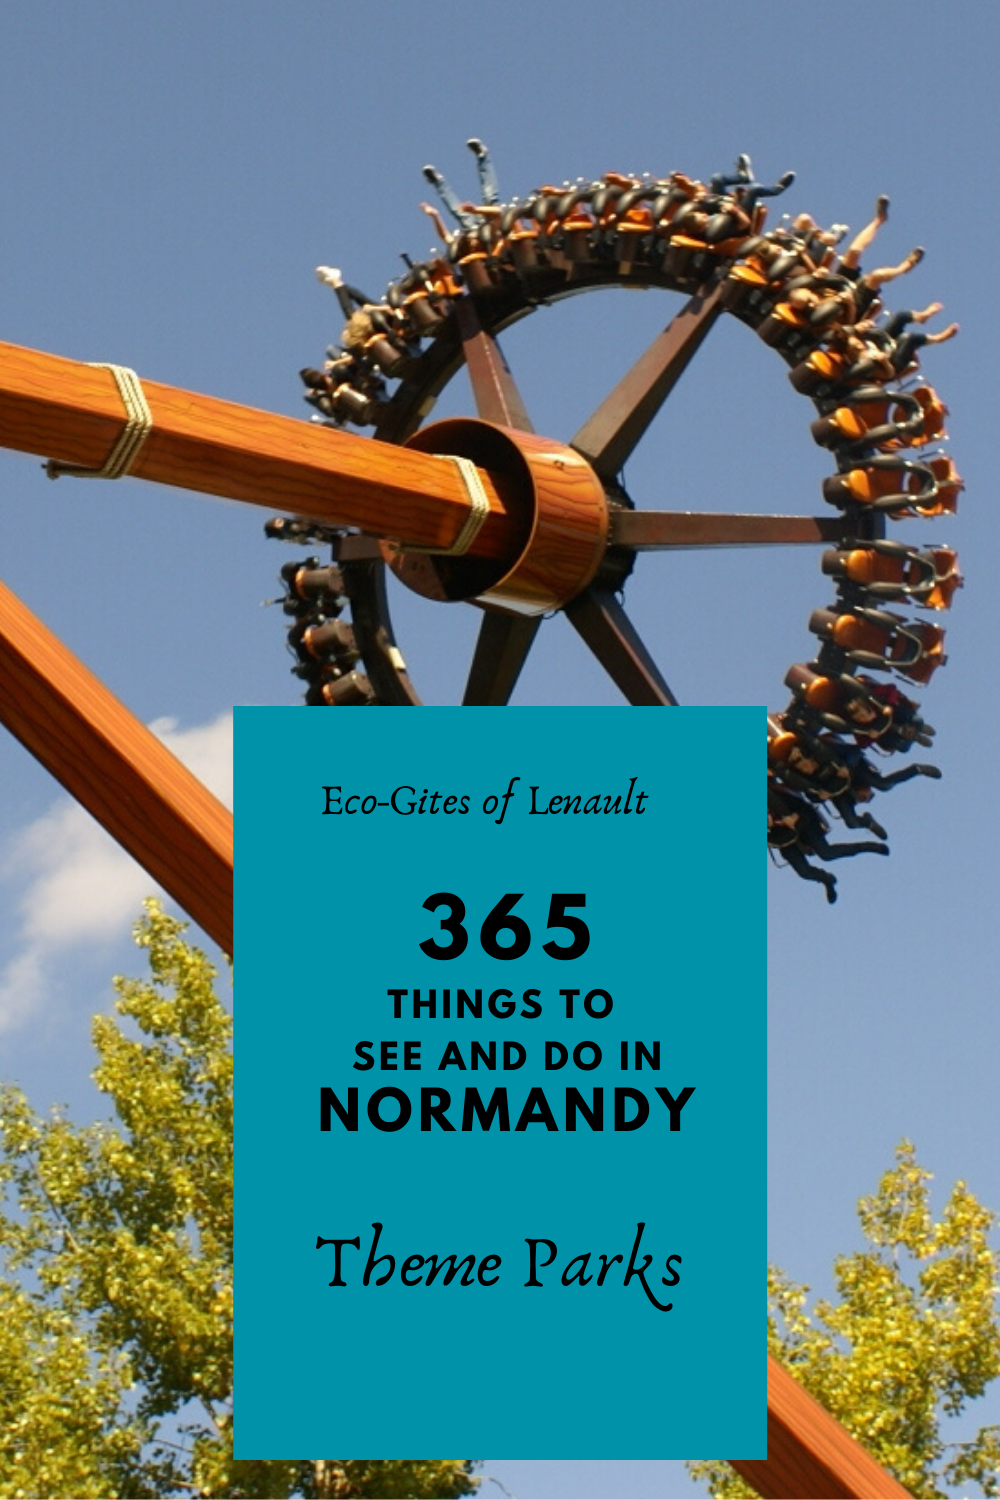 Theme parks in Normandy